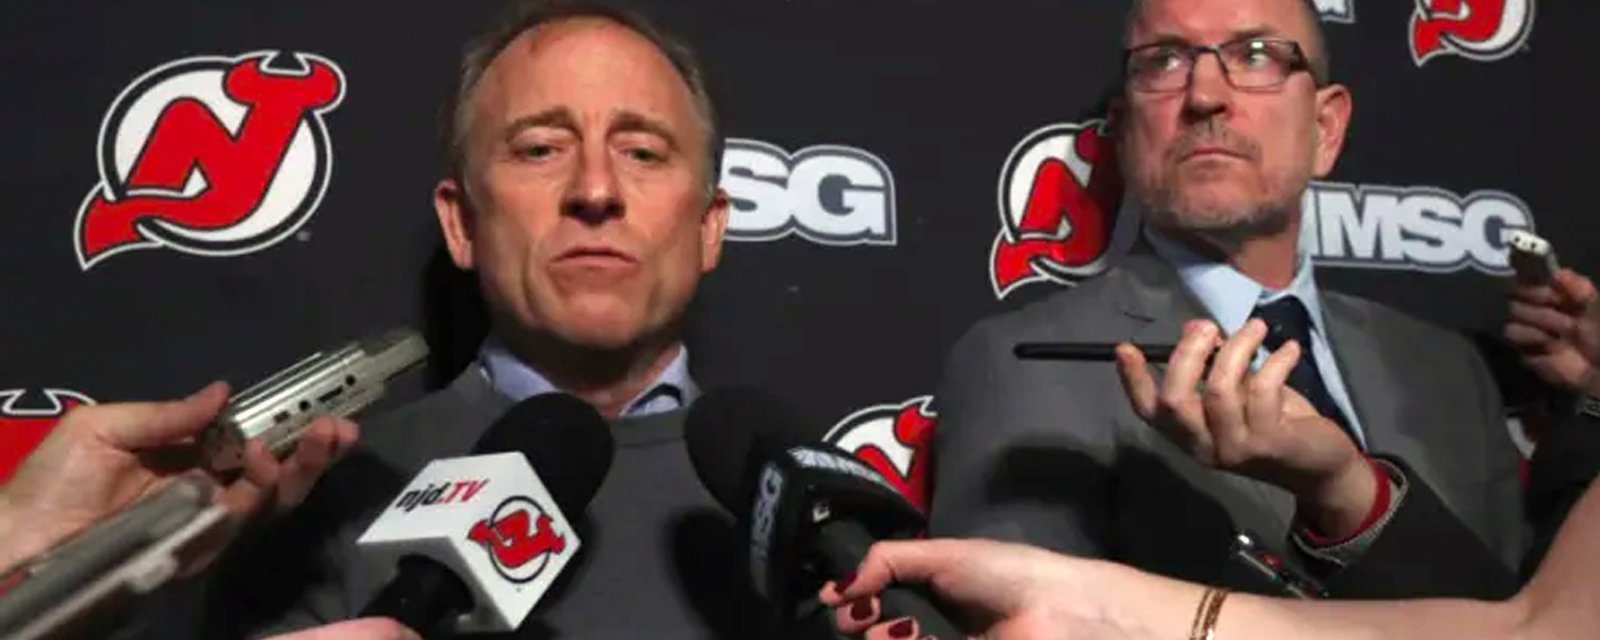 Devils force workers to take steep pay cuts, but allow top executives and players to collect full pay